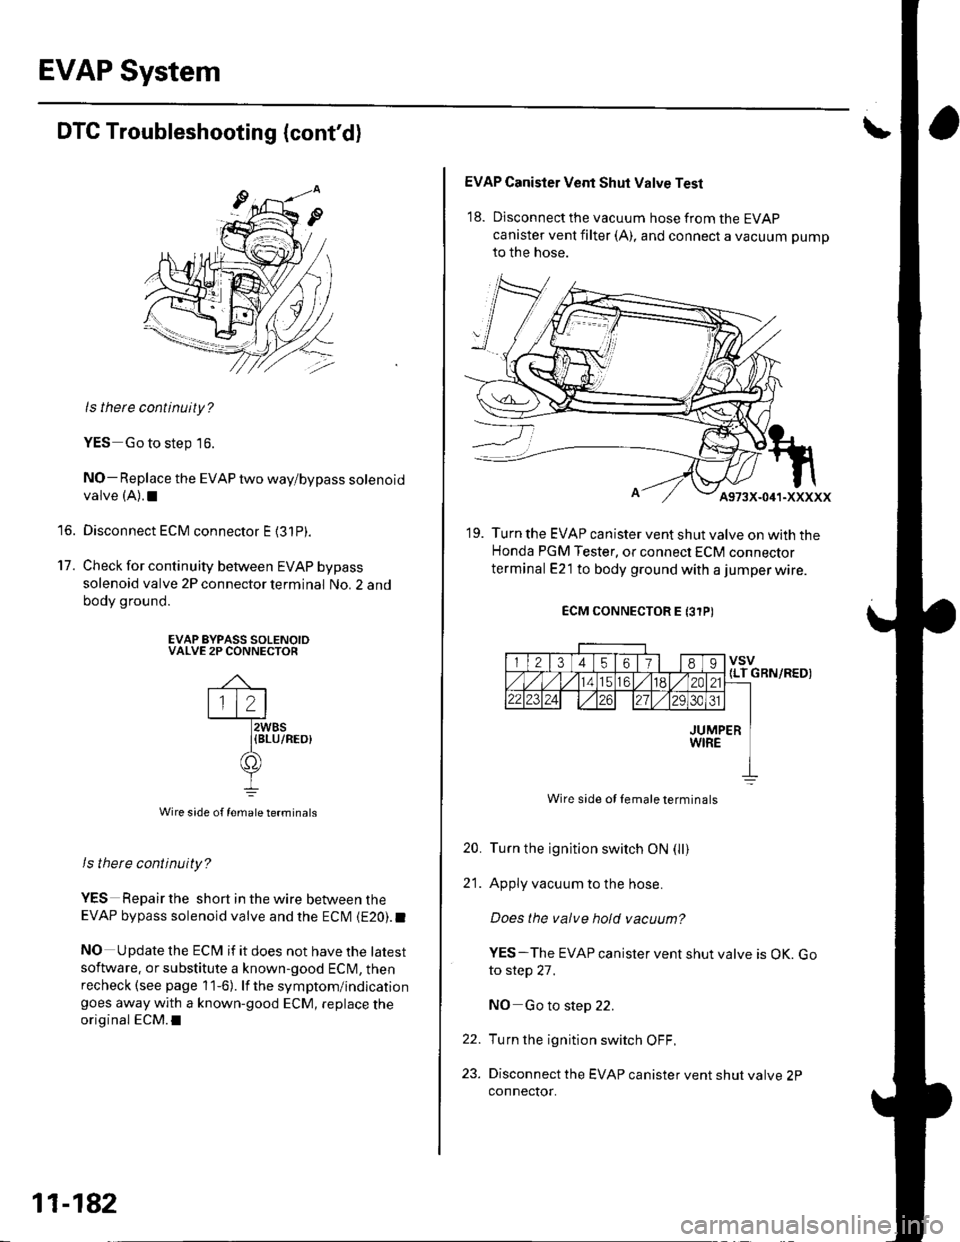 HONDA CIVIC 2003 7.G Workshop Manual EVAP System
to.
t7.
DTC Troubleshooting (contd)
ls there continuity?
YES Go to step 16.
NO- Replace the EVAP two waylbypass solenoidvalve (A).1
Disconnect ECM connector E {31P).
Check for continuity